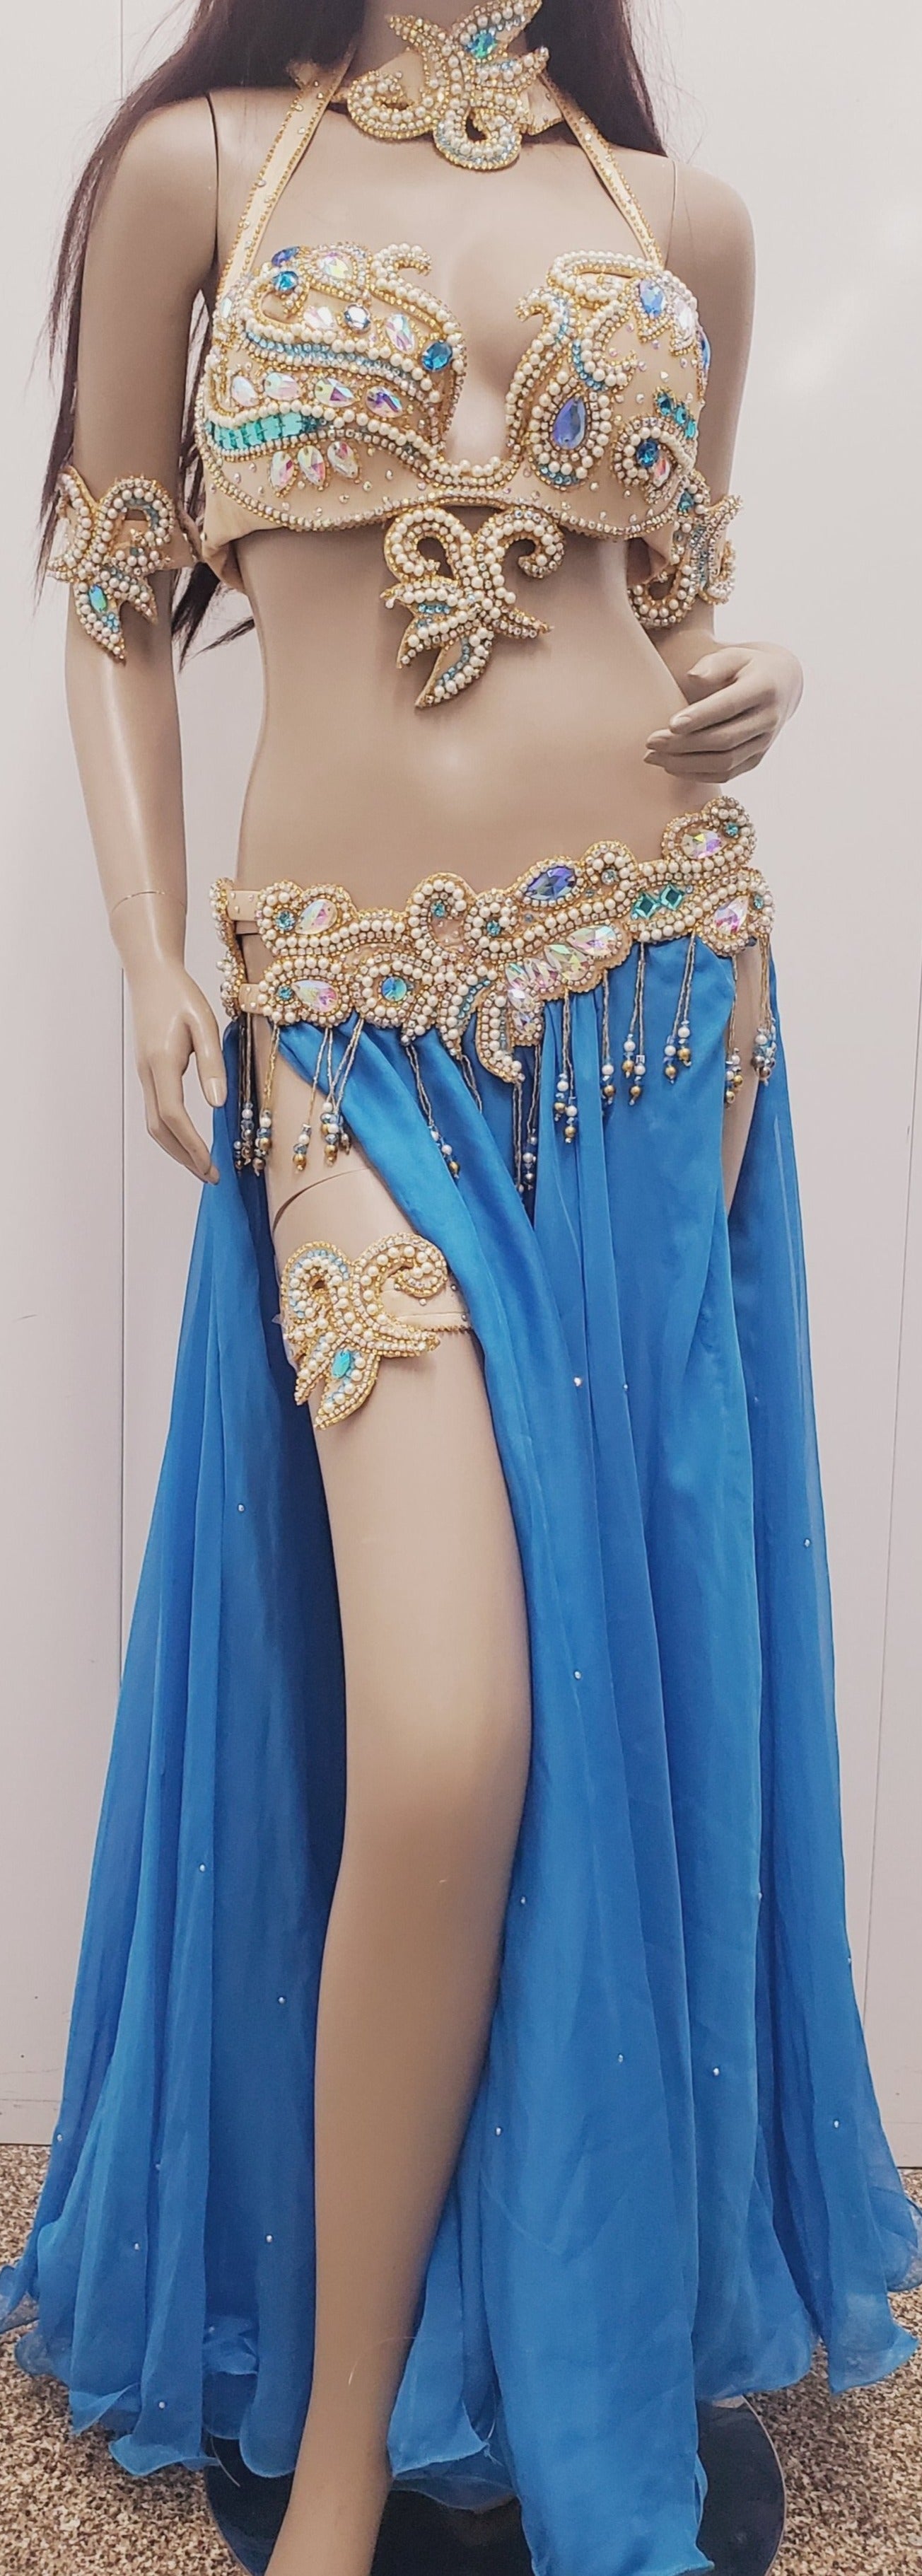 Bellydance costumes for sale